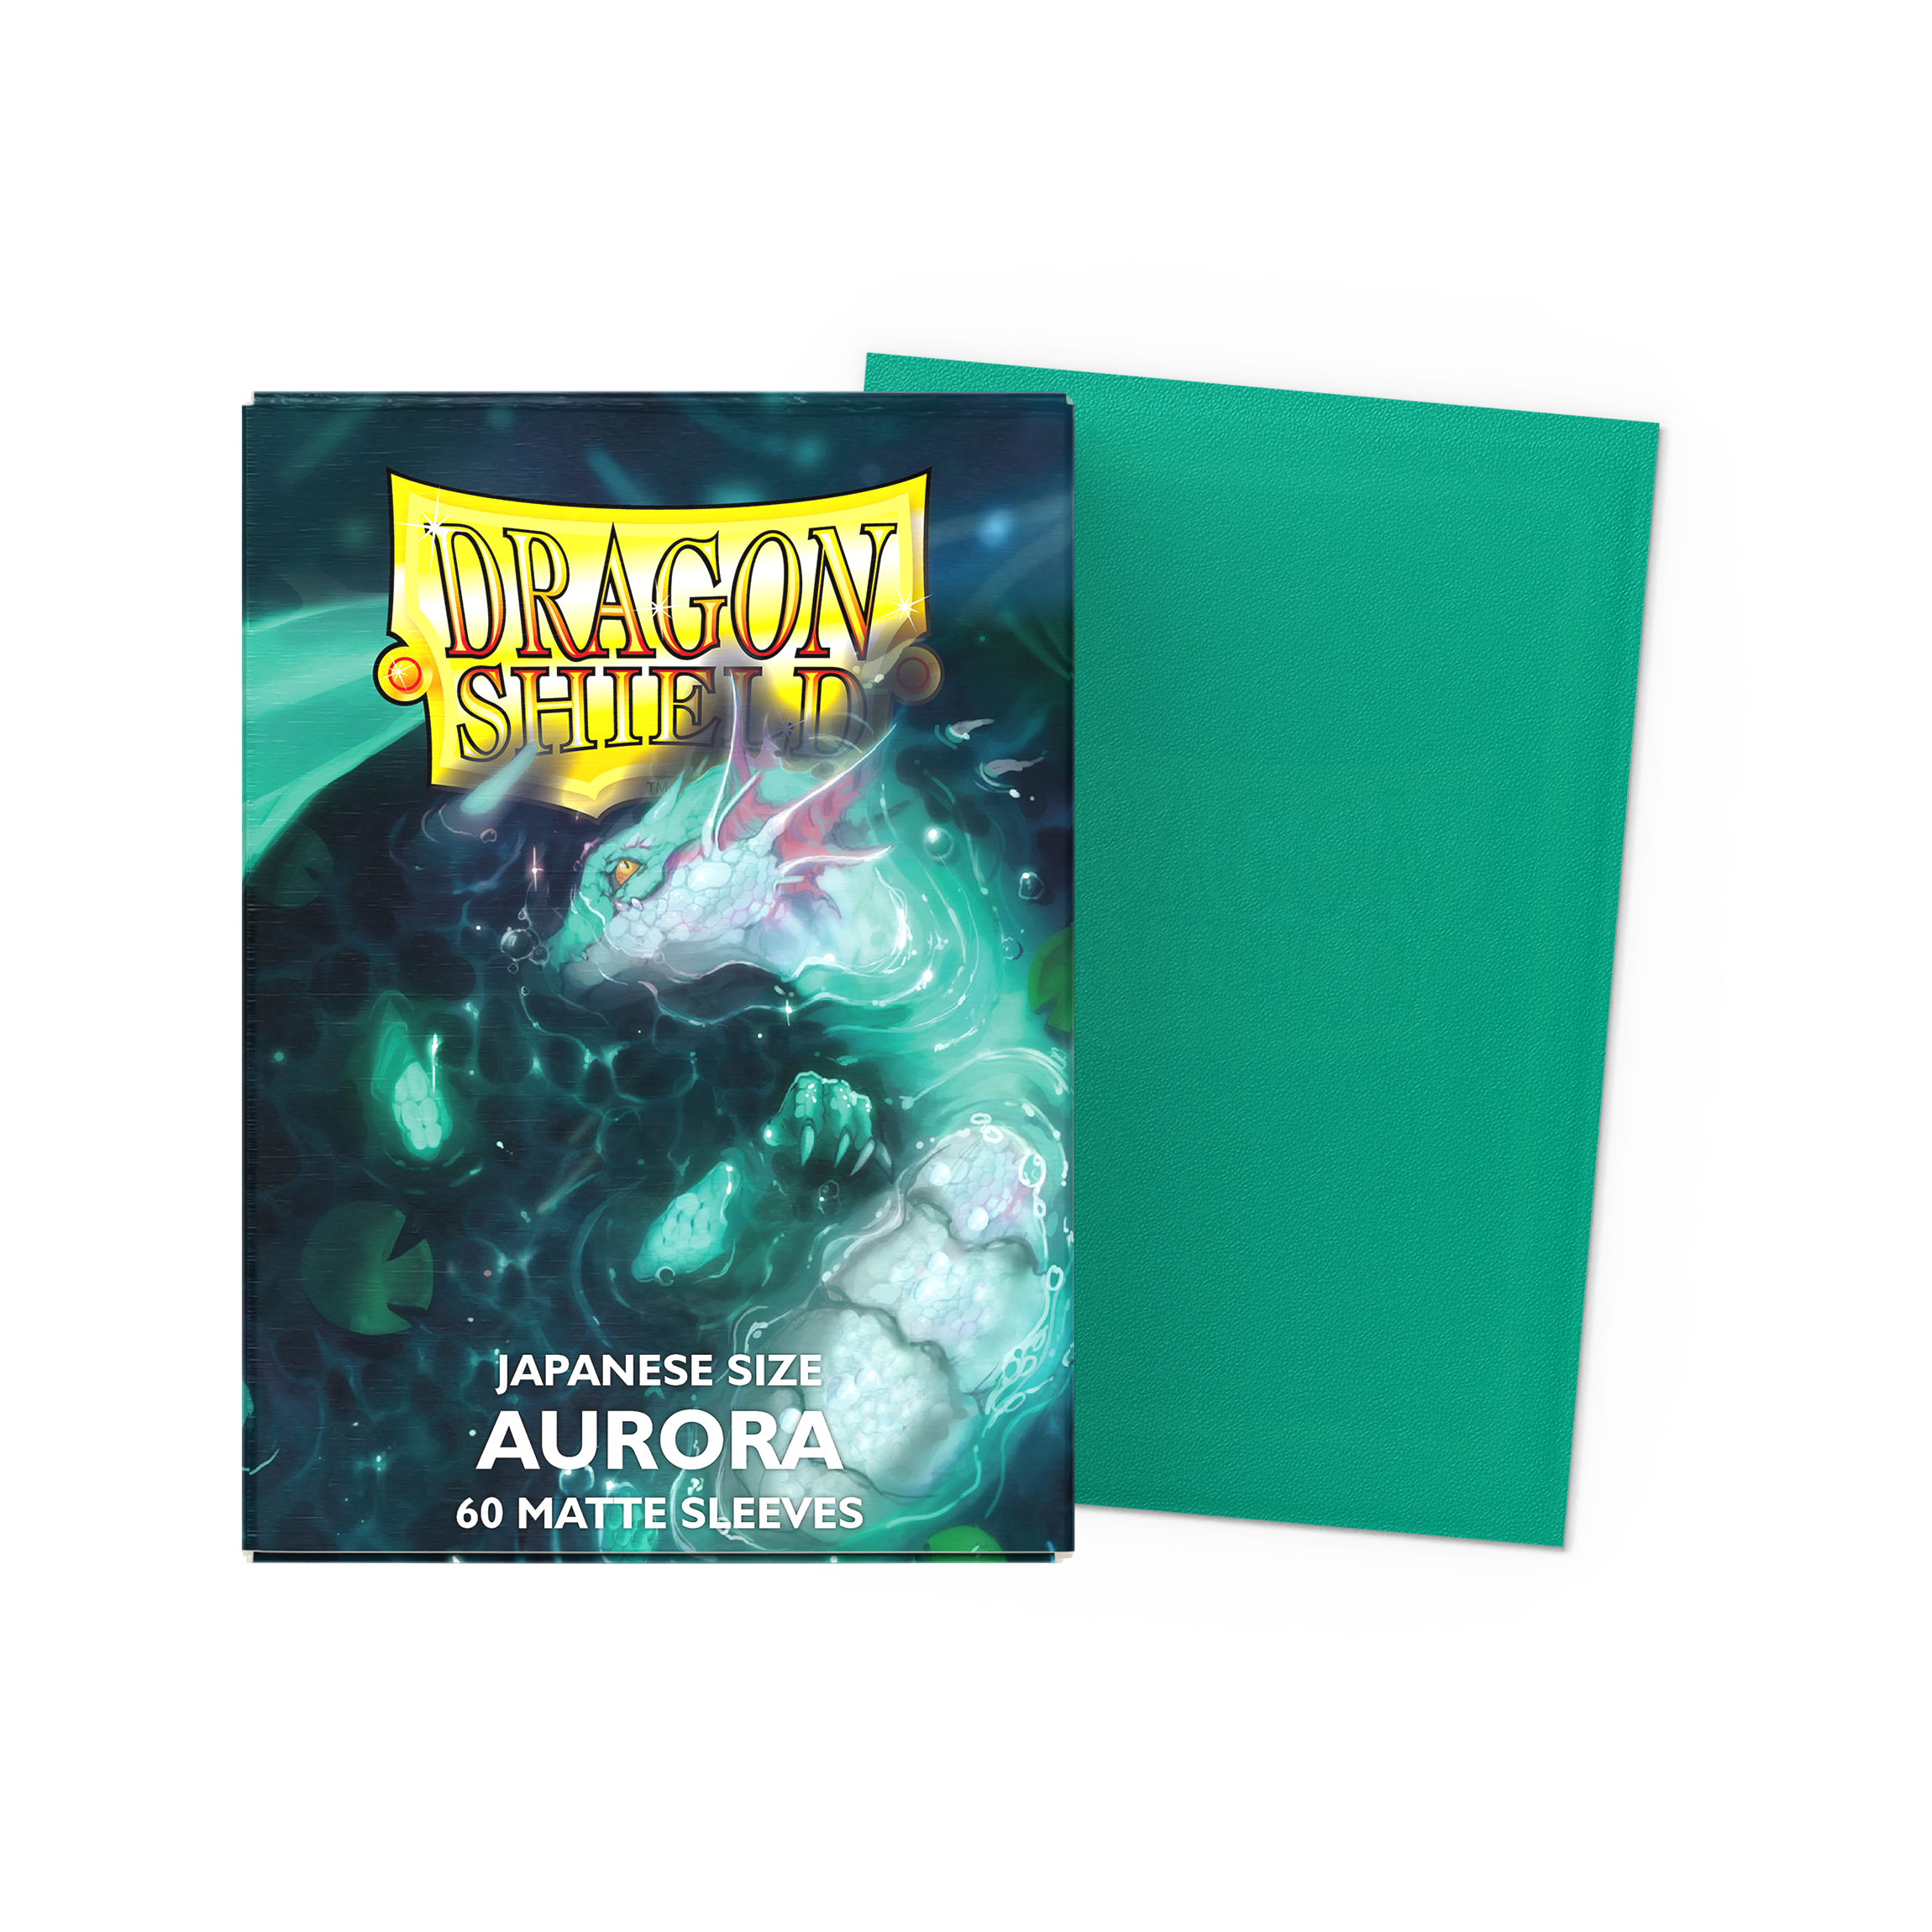 Dragon Shield matte sleeves for each color combination - V2 (final) :  r/magicTCG